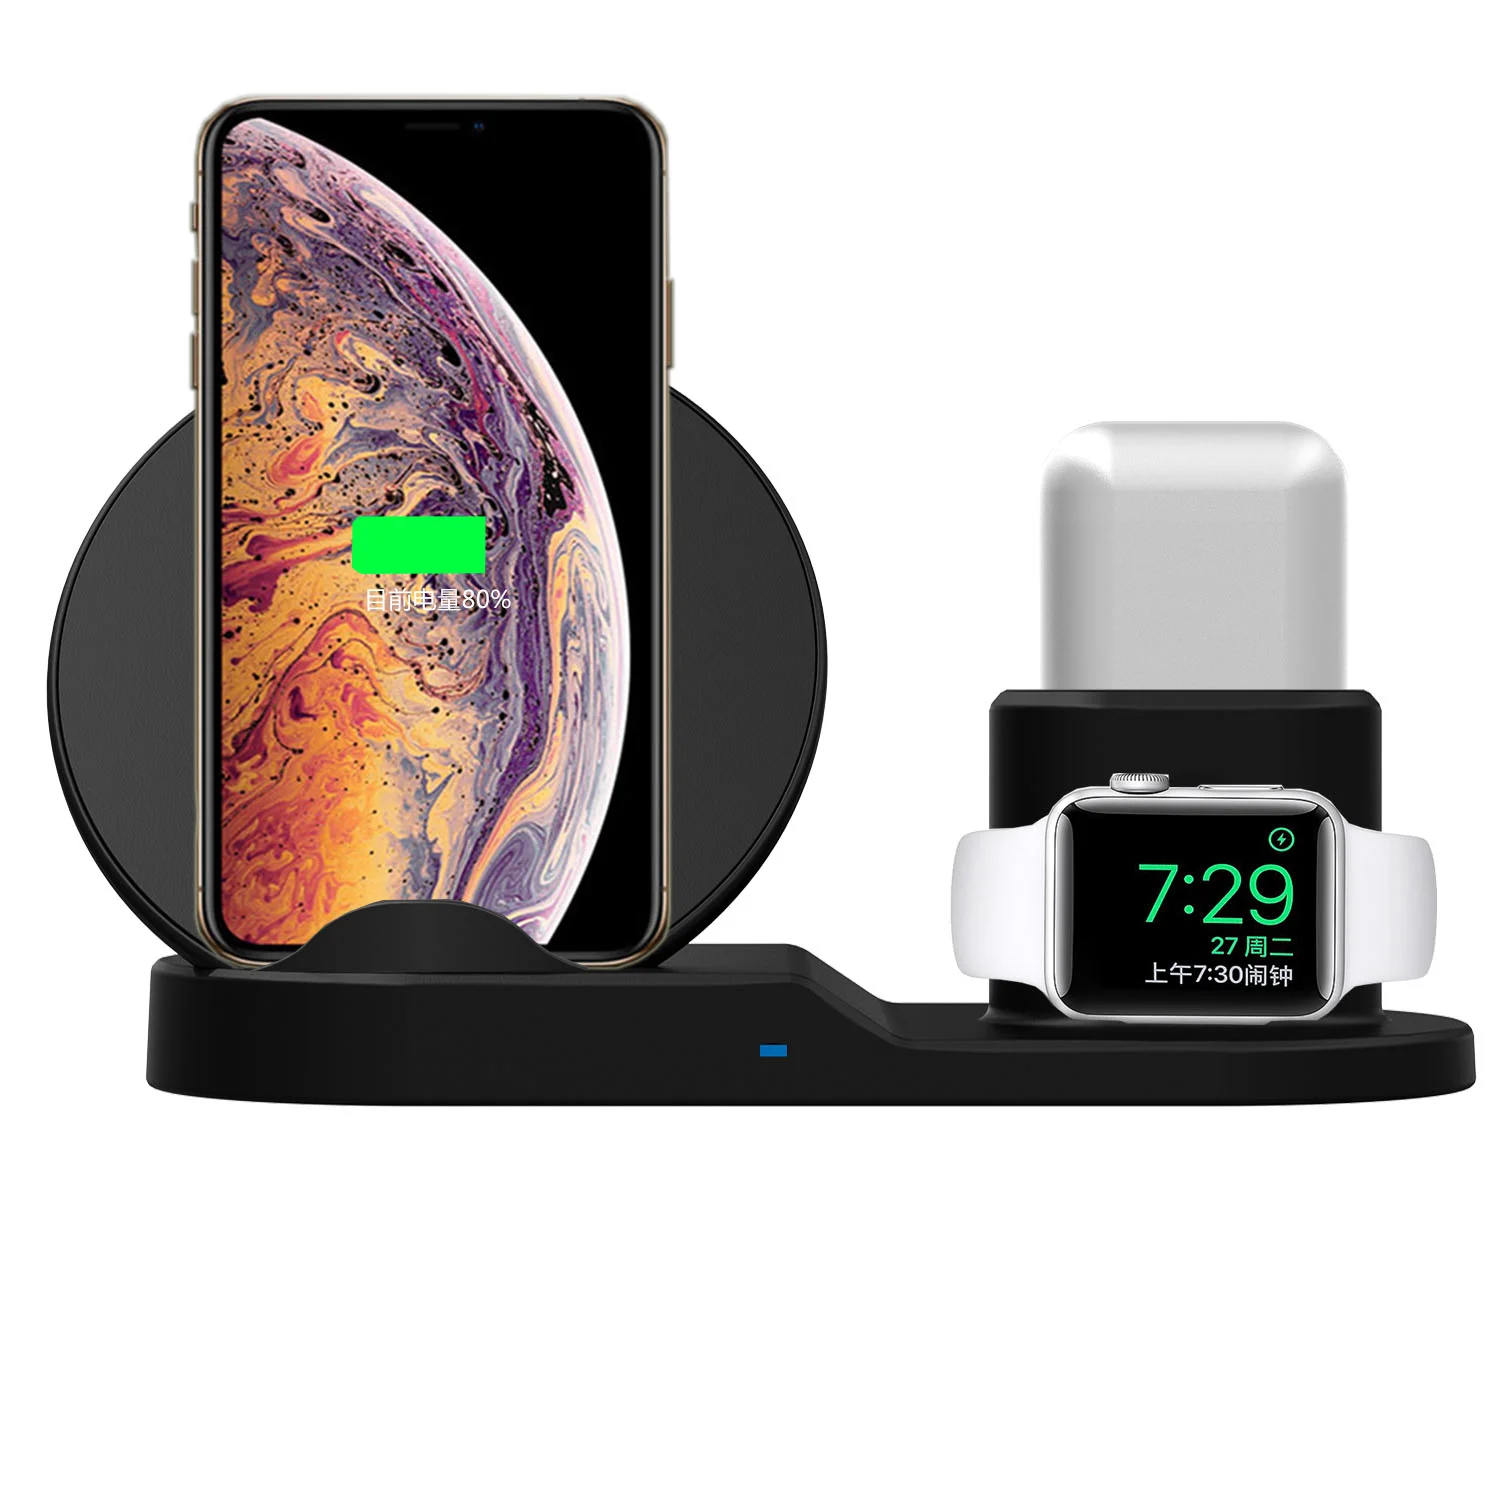 3 in 1 Qi Charging pad, Ultra-Slim Fast Charge Dual for iPhone X/8/8 Plus/XR/XS Max Apple Watch for Samsung Galaxy Note S7/S8/S8